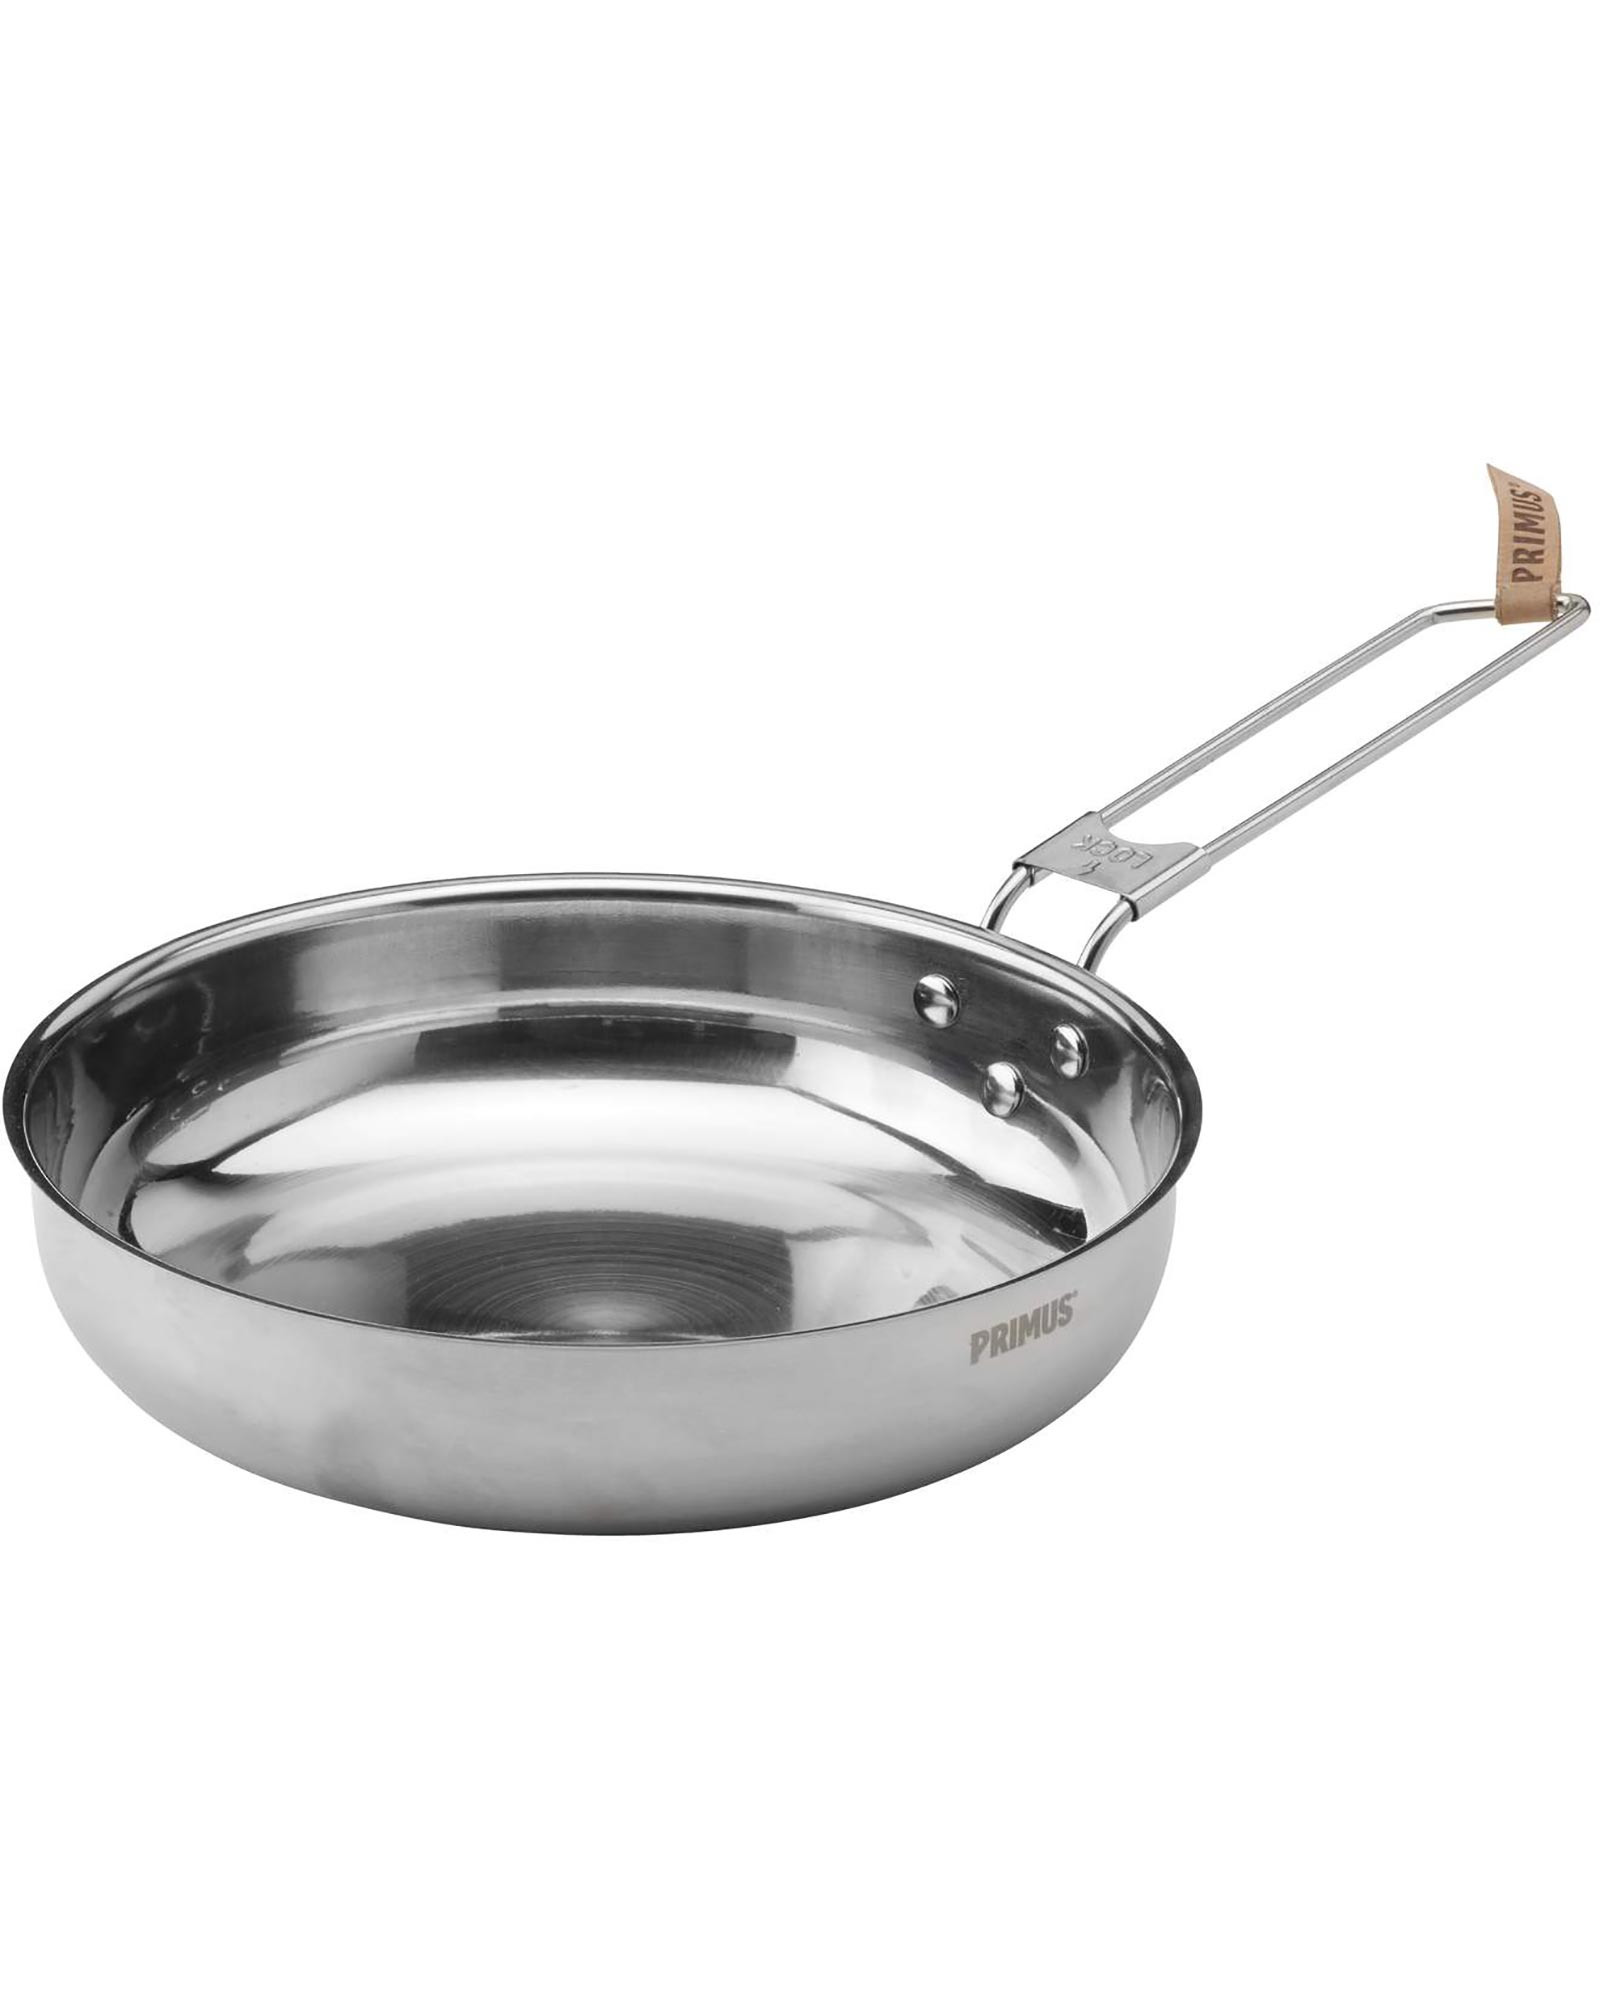 Primus CampFire Frying Pan